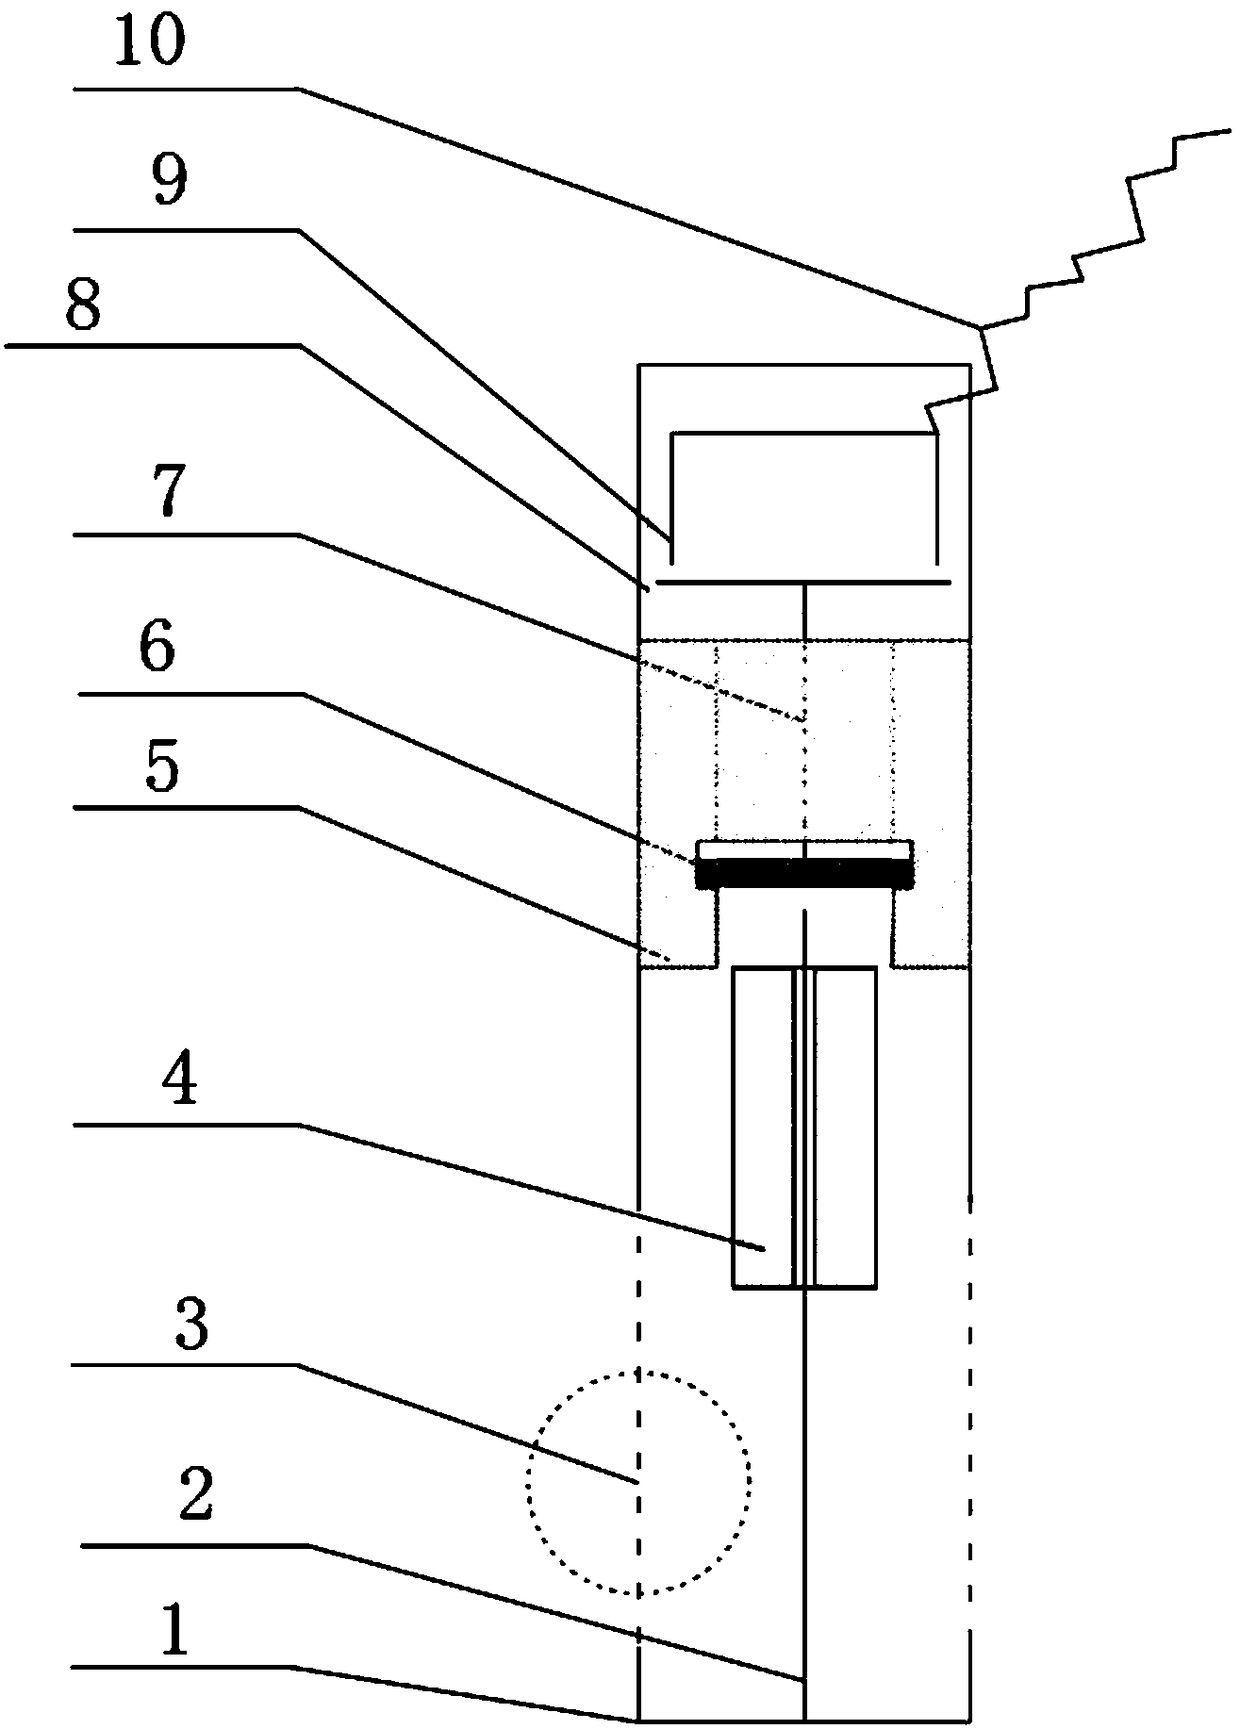 Orientated detection device for density of solution